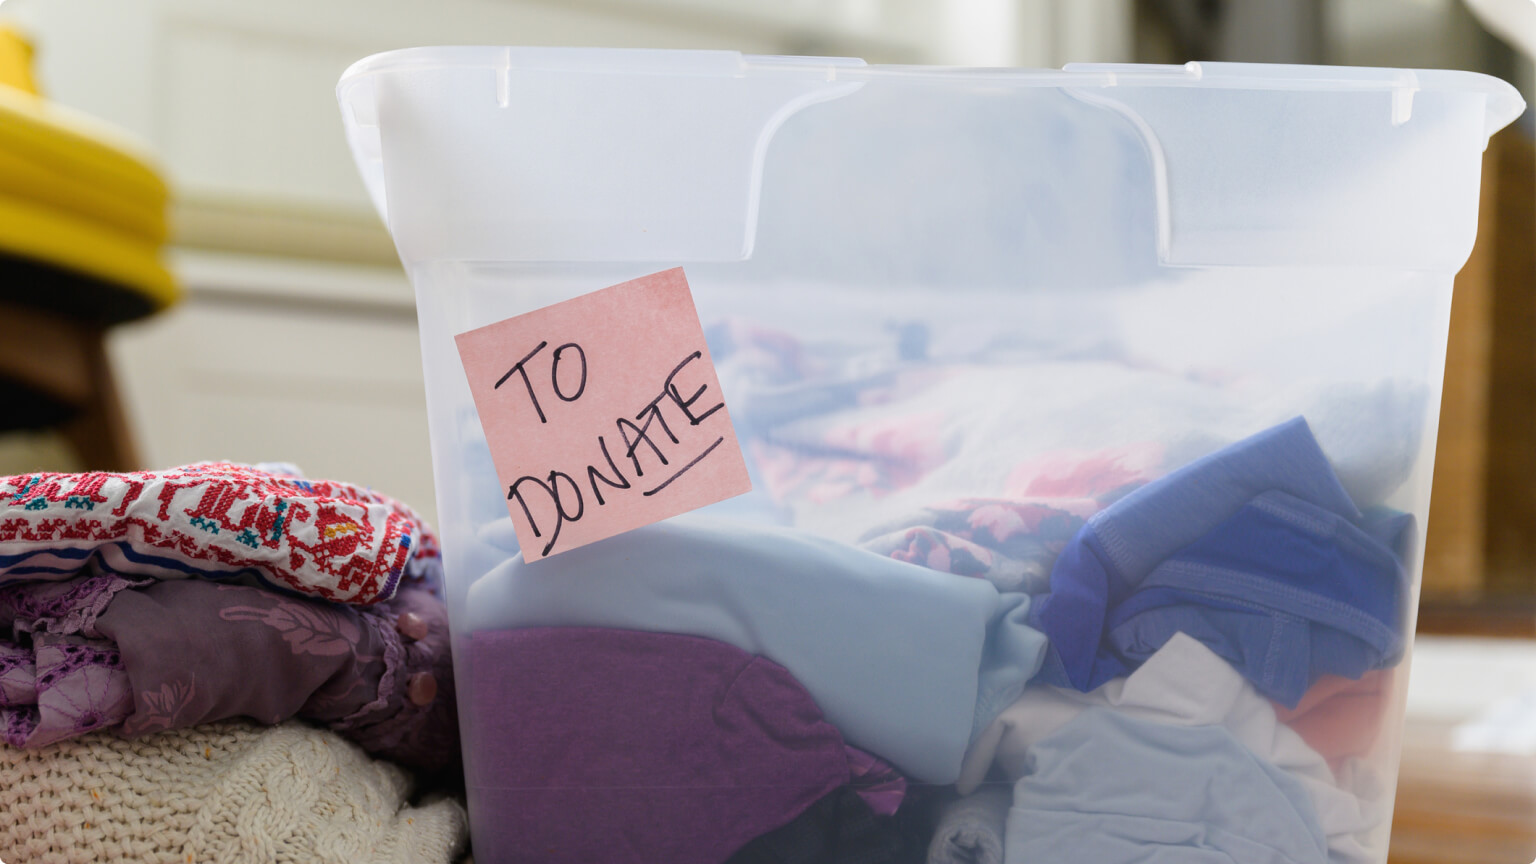 Clothes in bin marked for donation